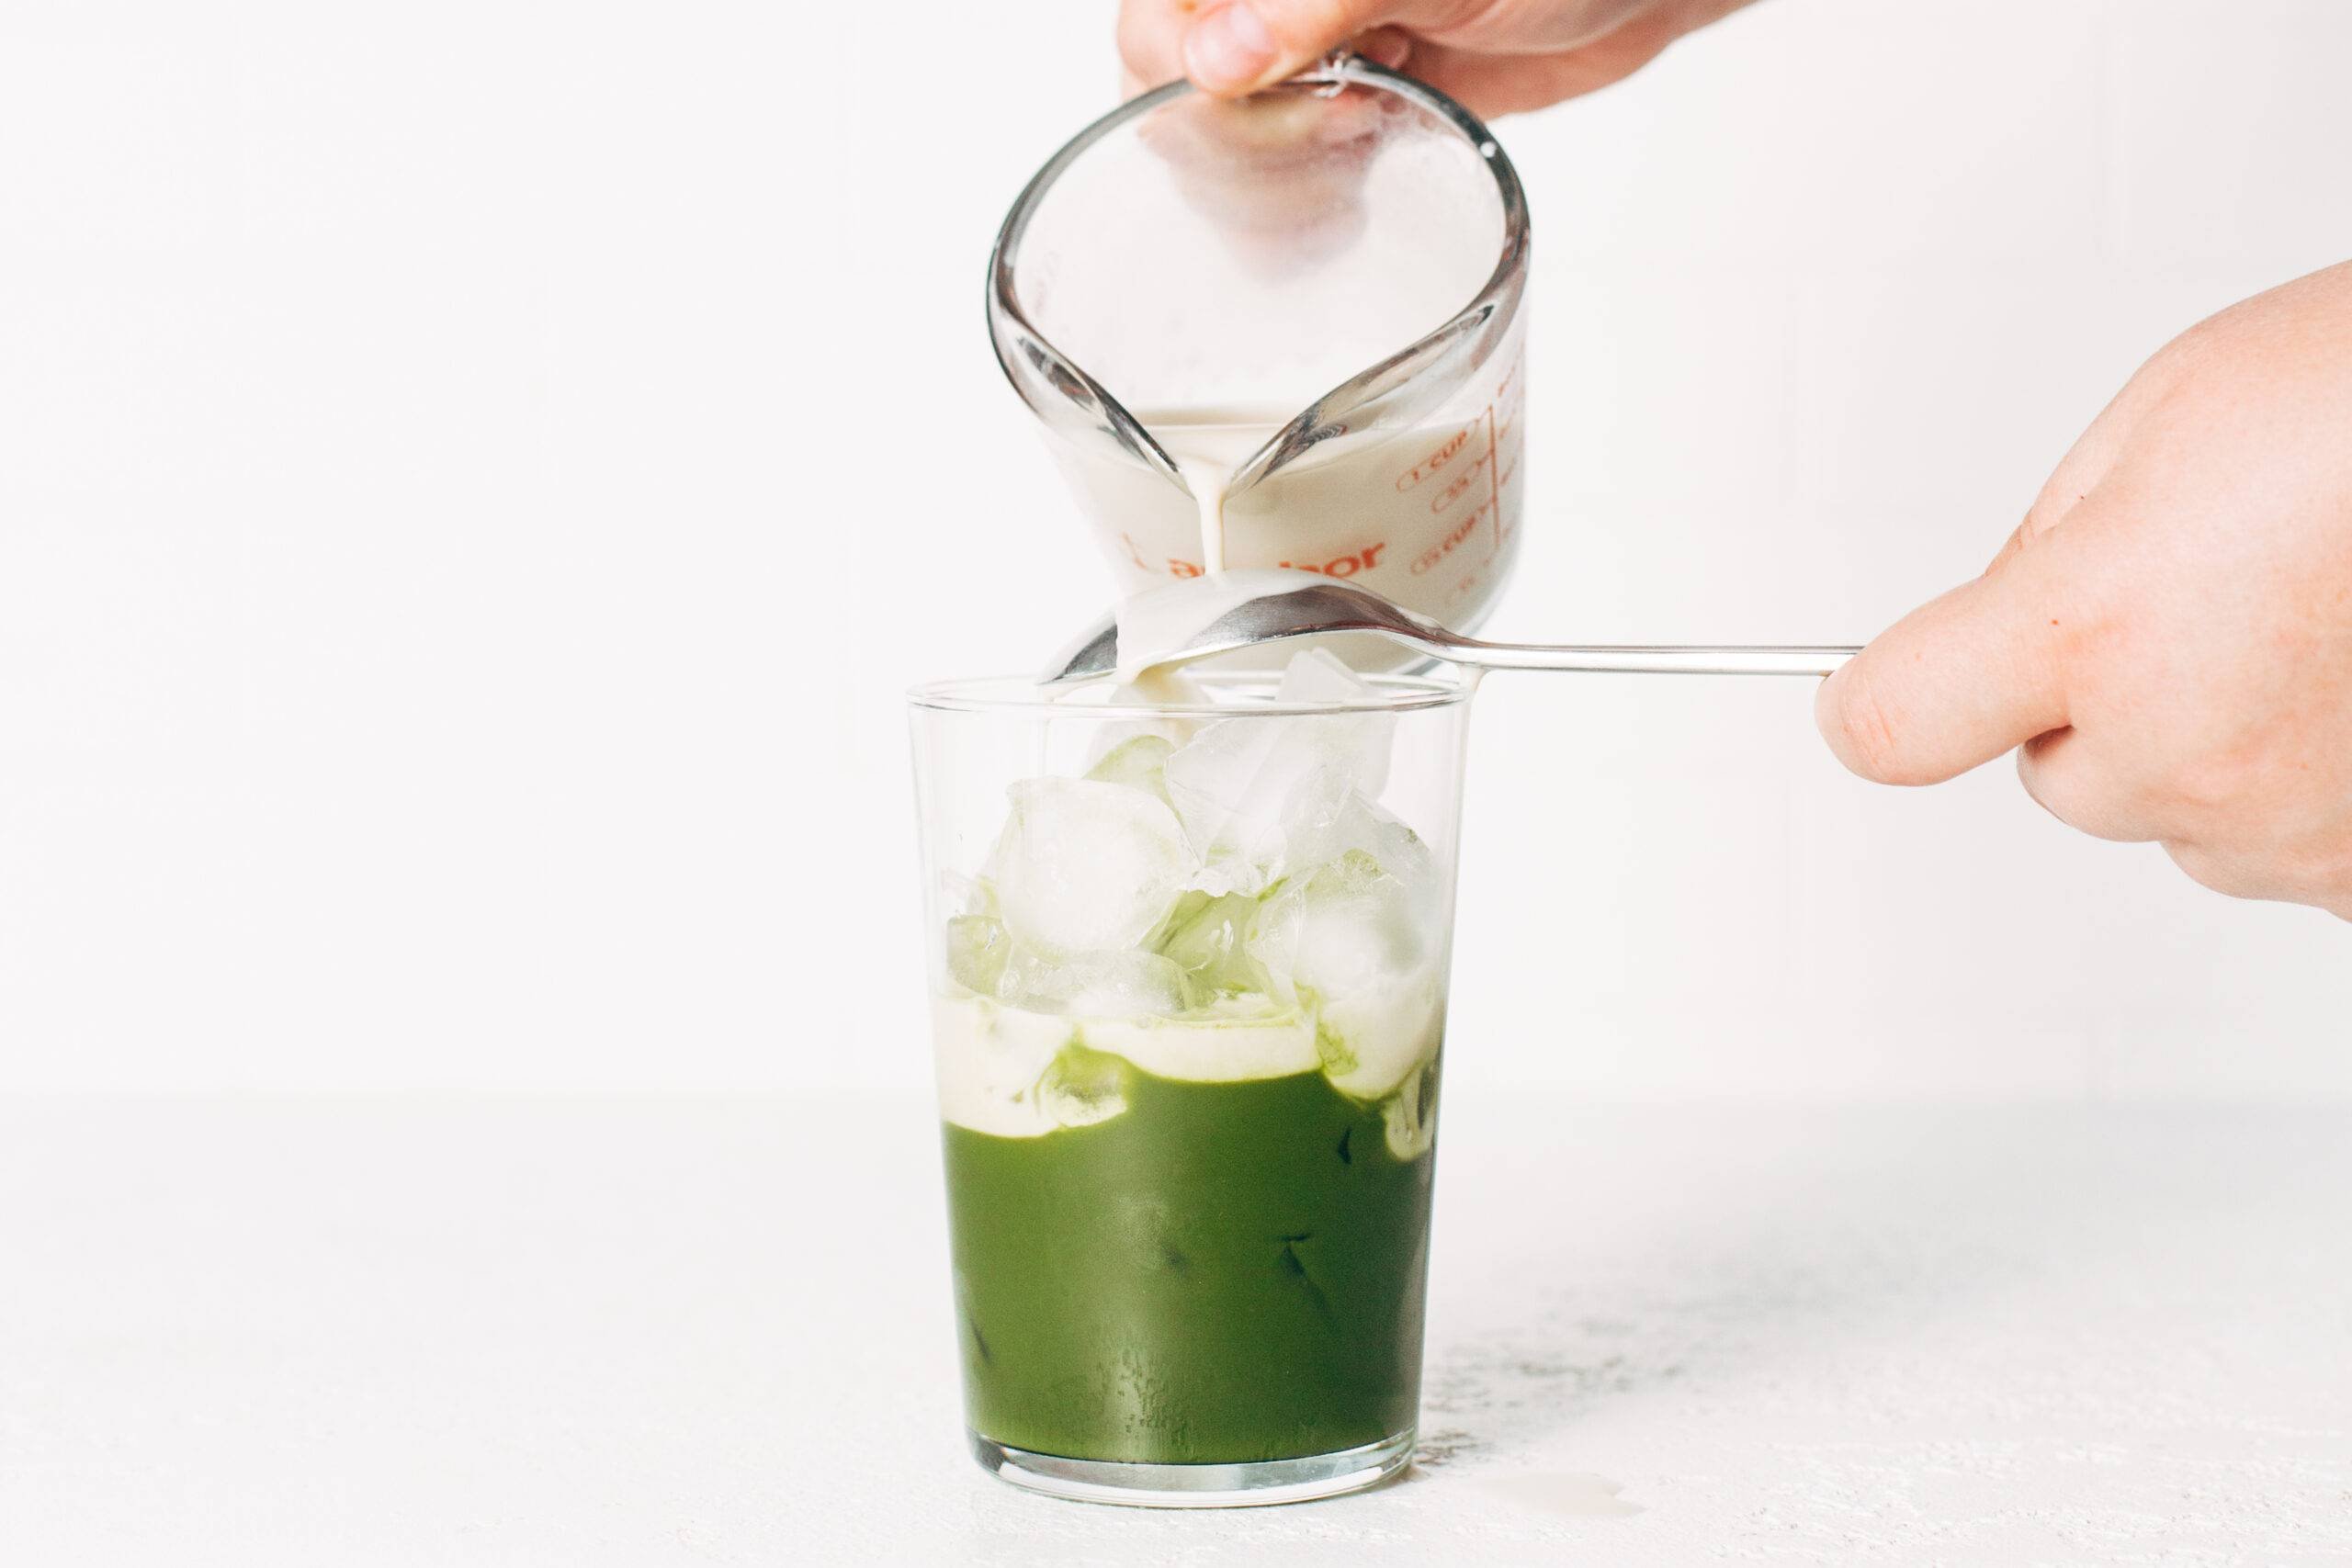 Oat milk and matcha in a glass with ice